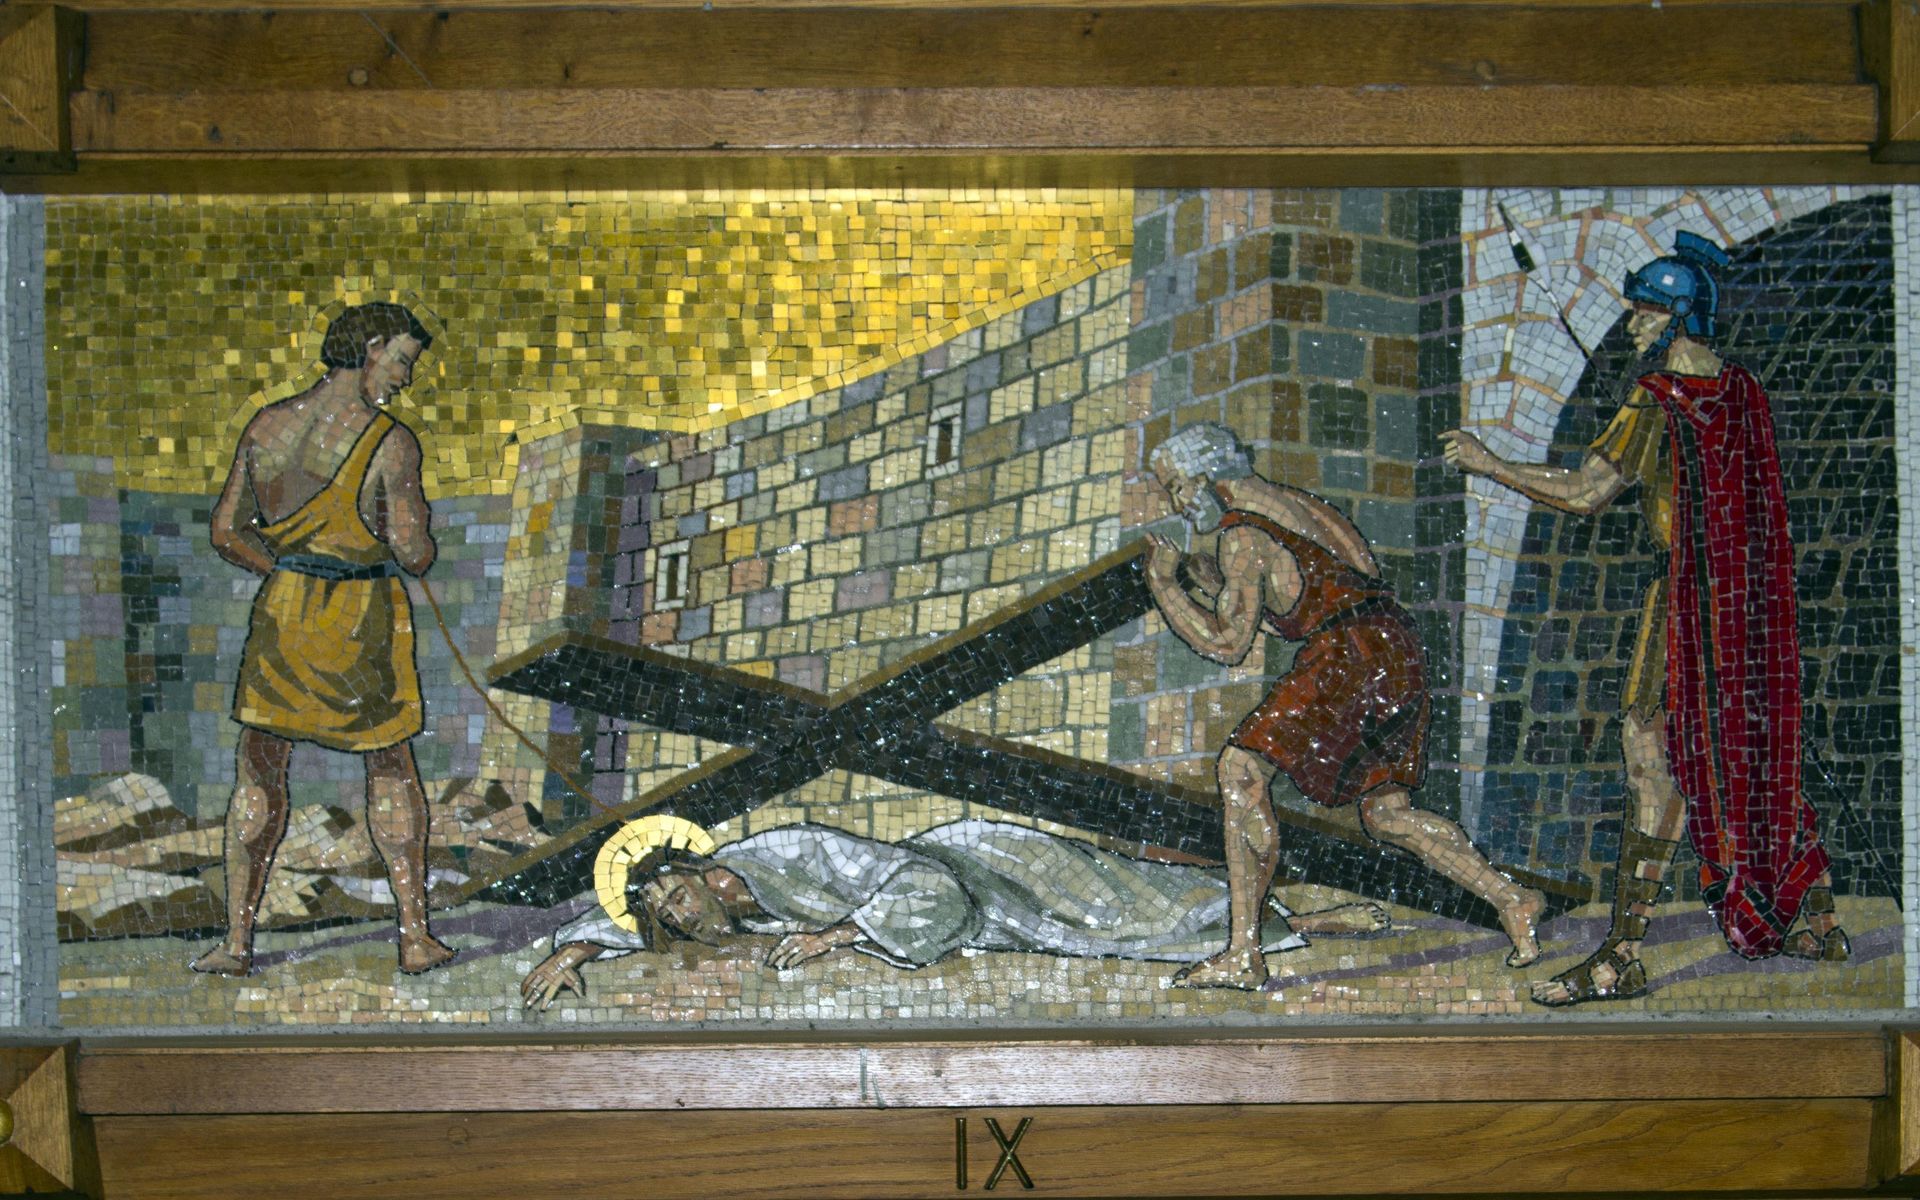 A painting of jesus carrying a cross with two men standing next to him.